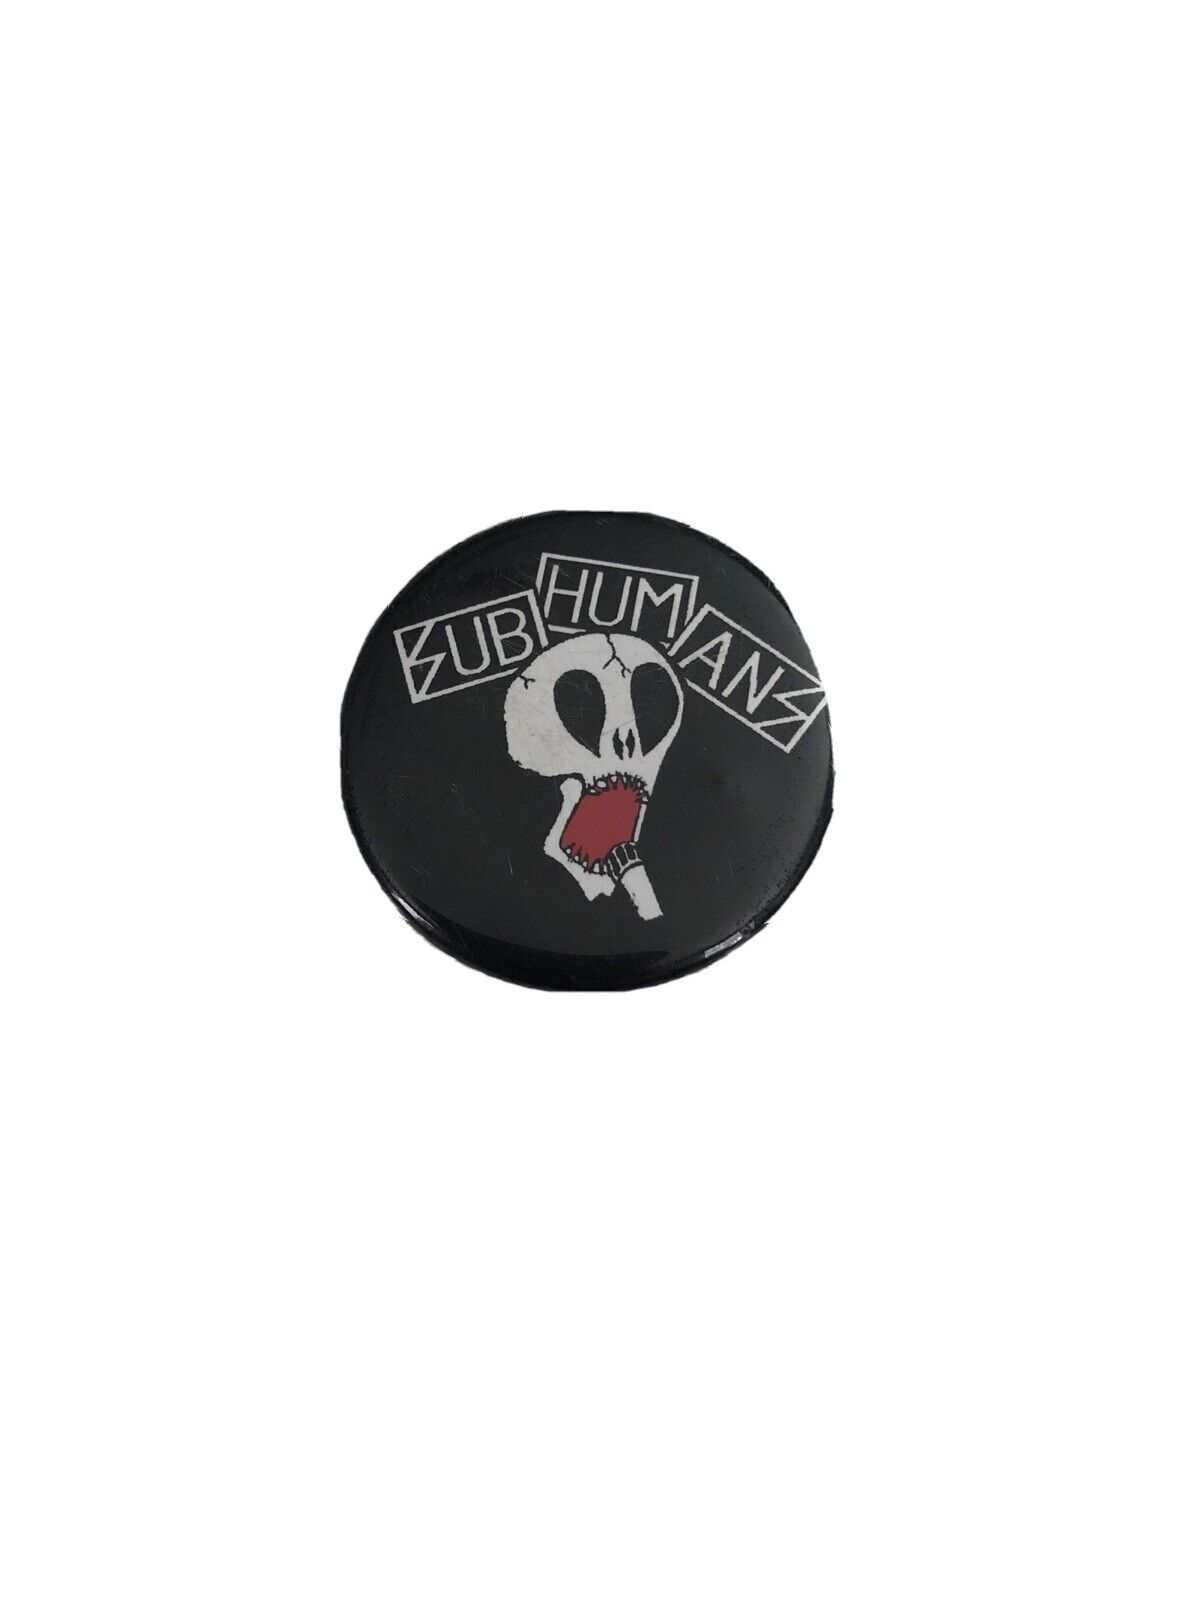 Subhumans Pinback Buttons Pin Badge Great Condition